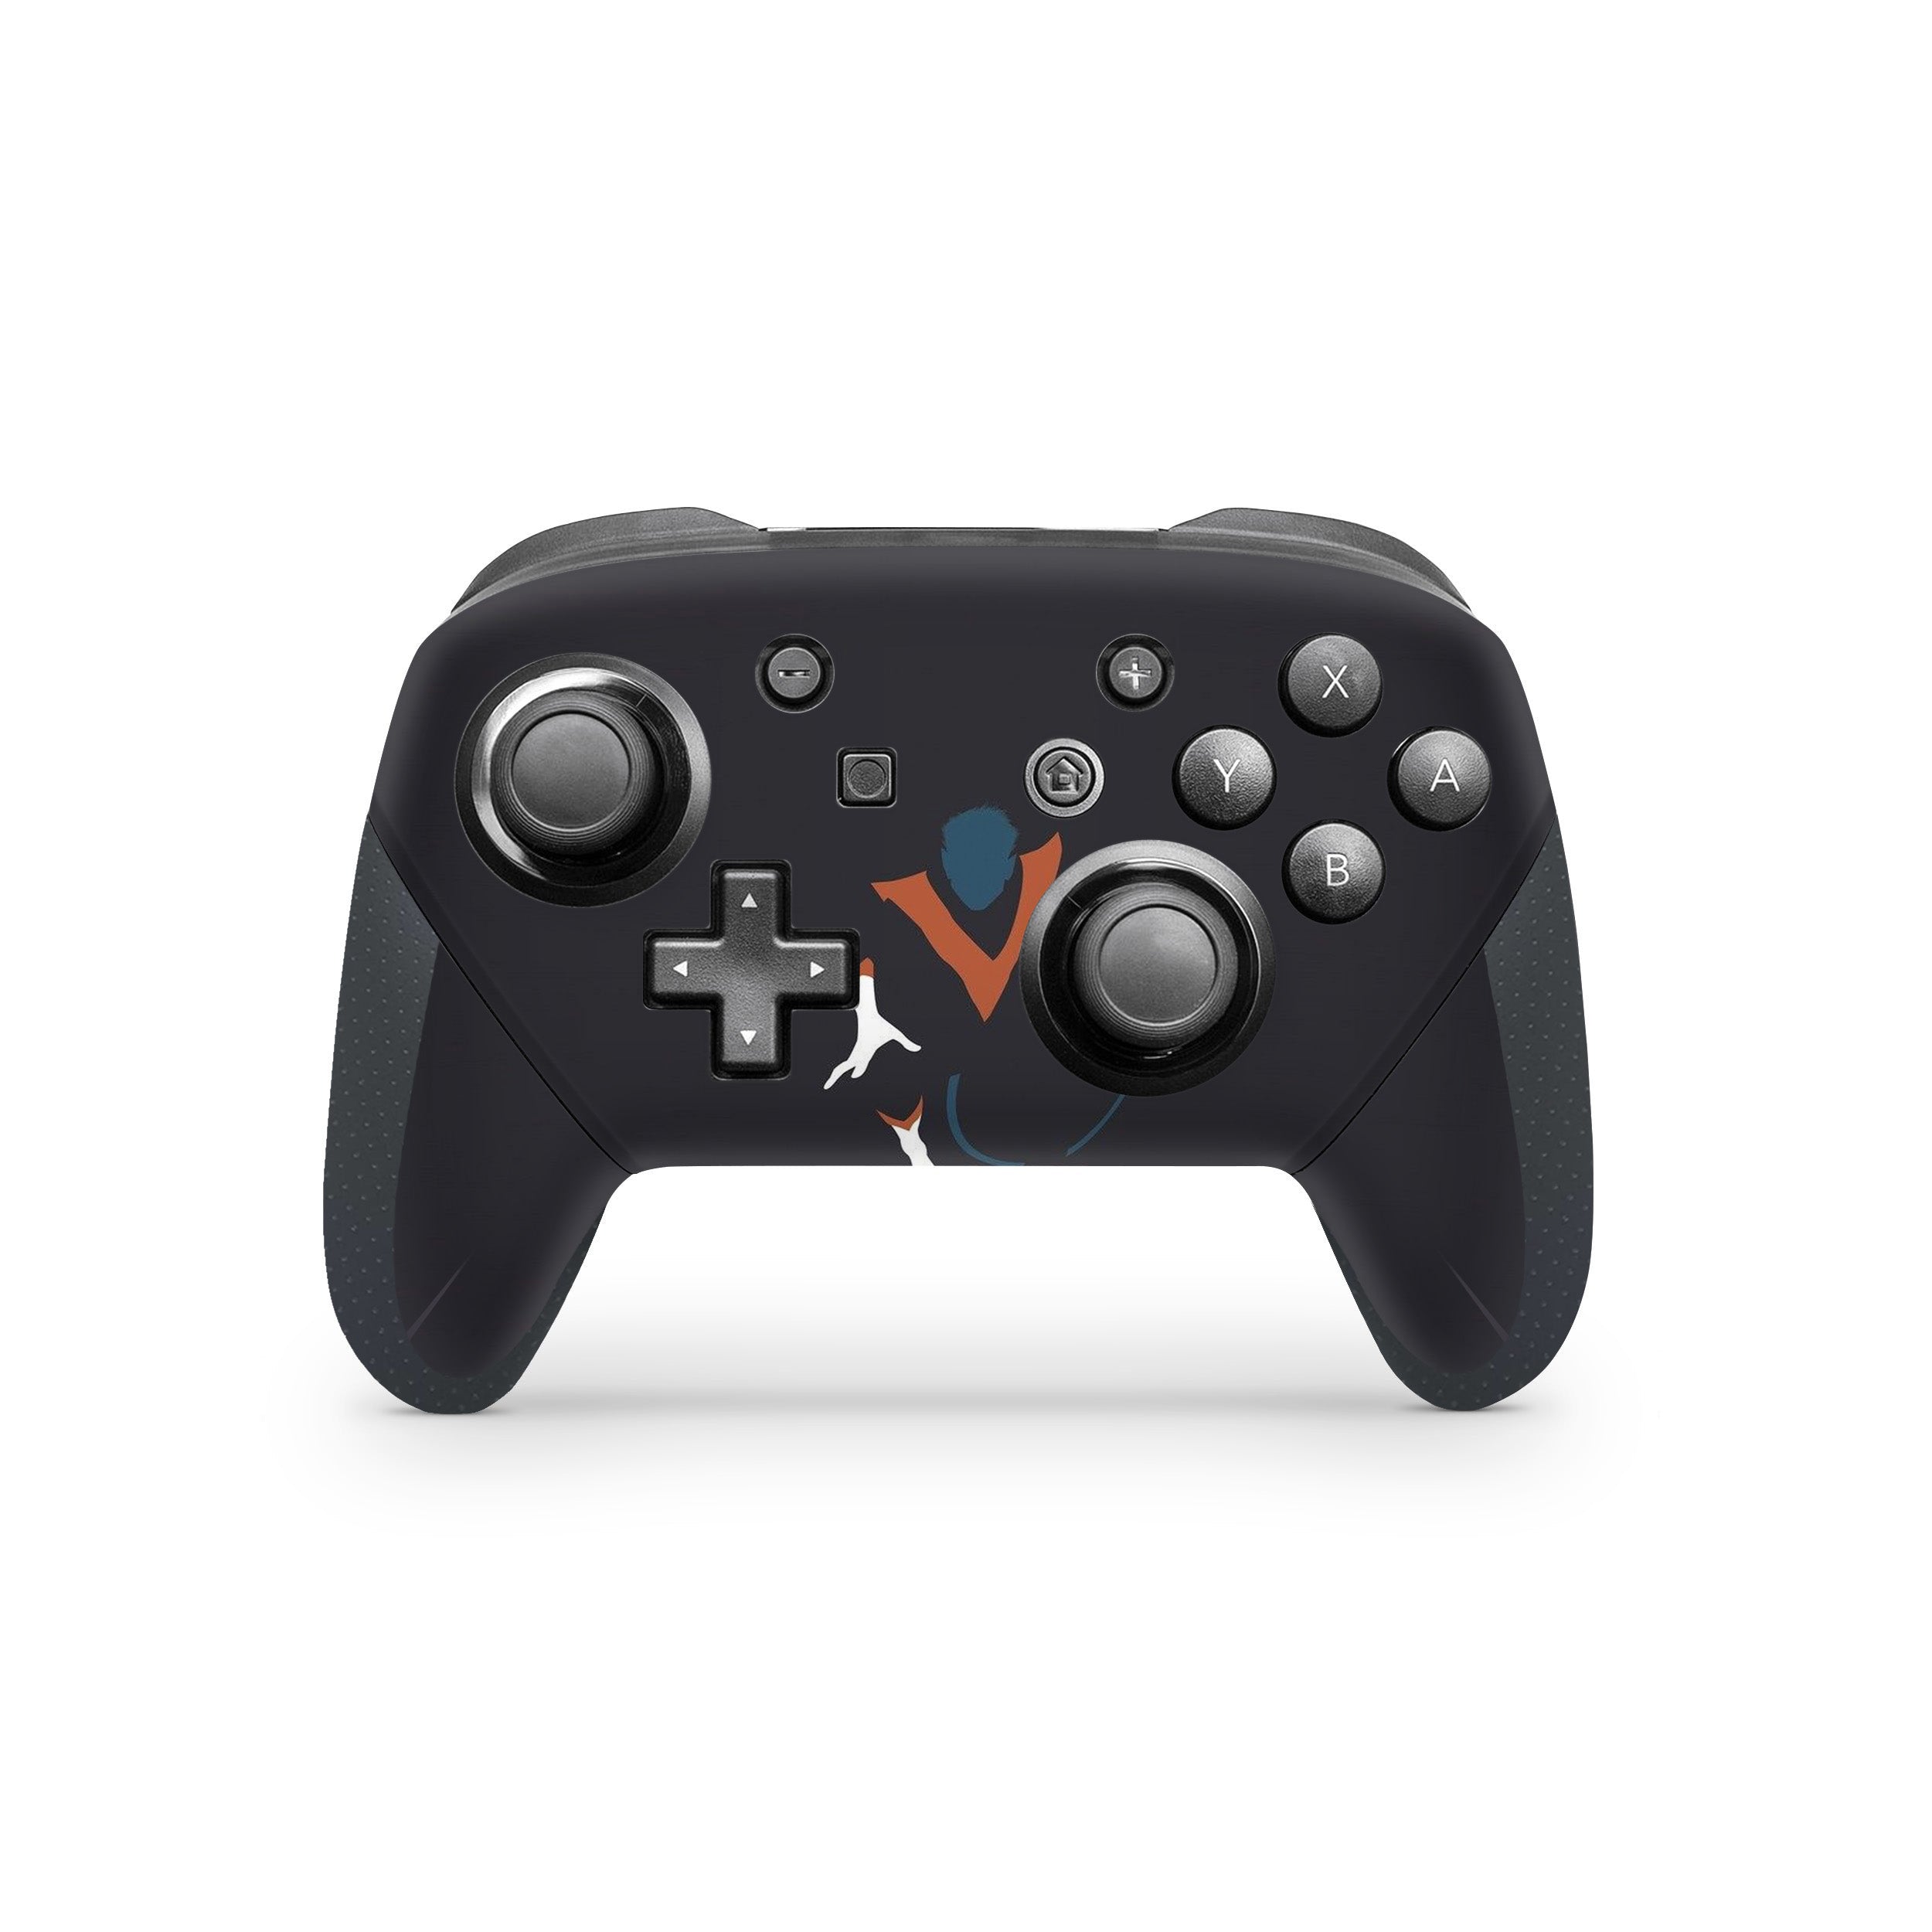 A video game skin featuring a Marvel X Men Nightcrawler design for the Switch Pro Controller.